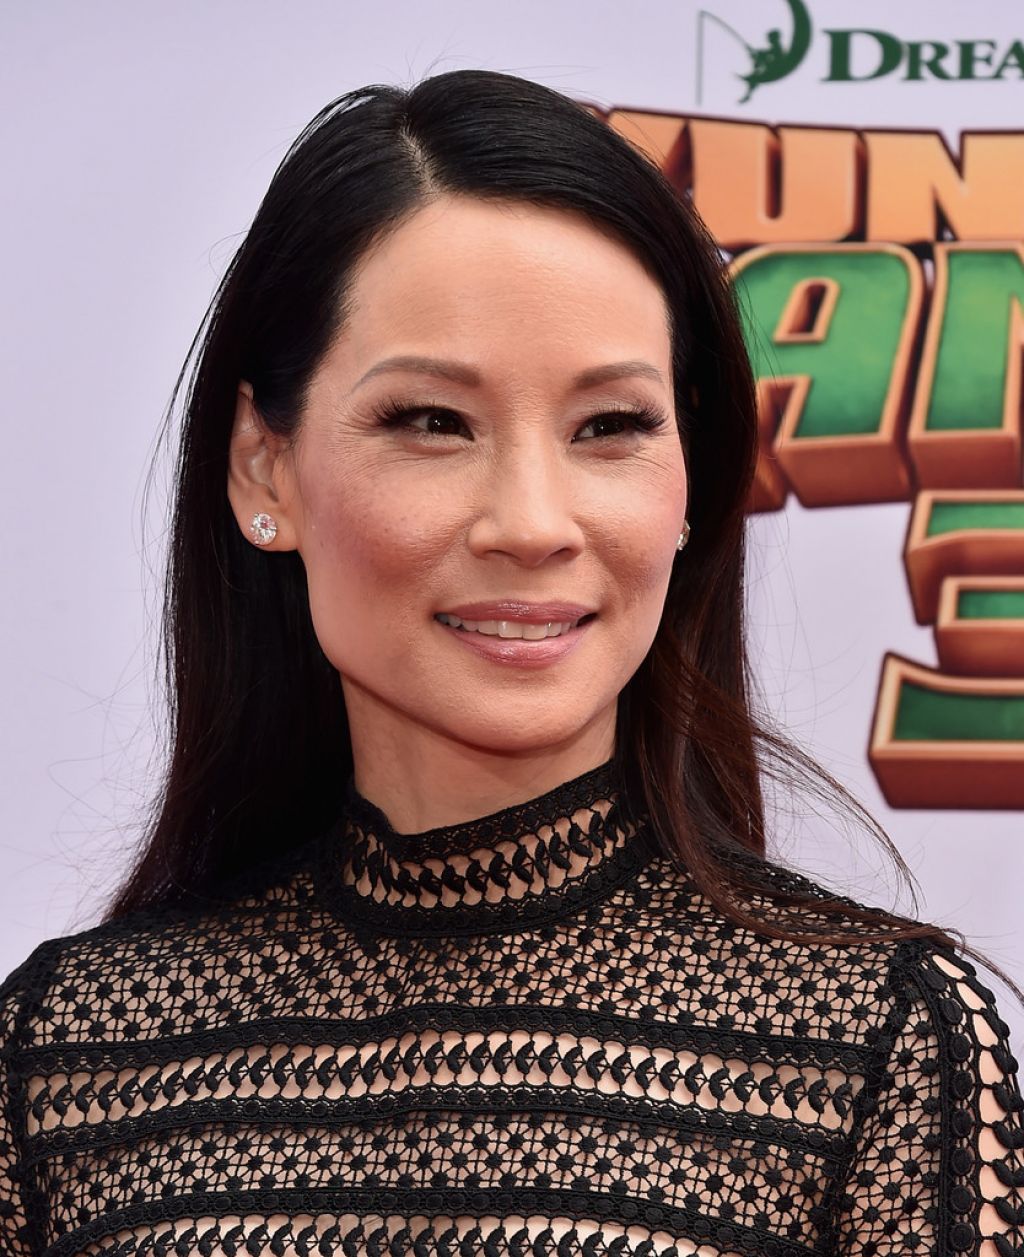 lucy-liu-on-red-carpet-kung-fu-panda-3-premiere-in-hollywood-11